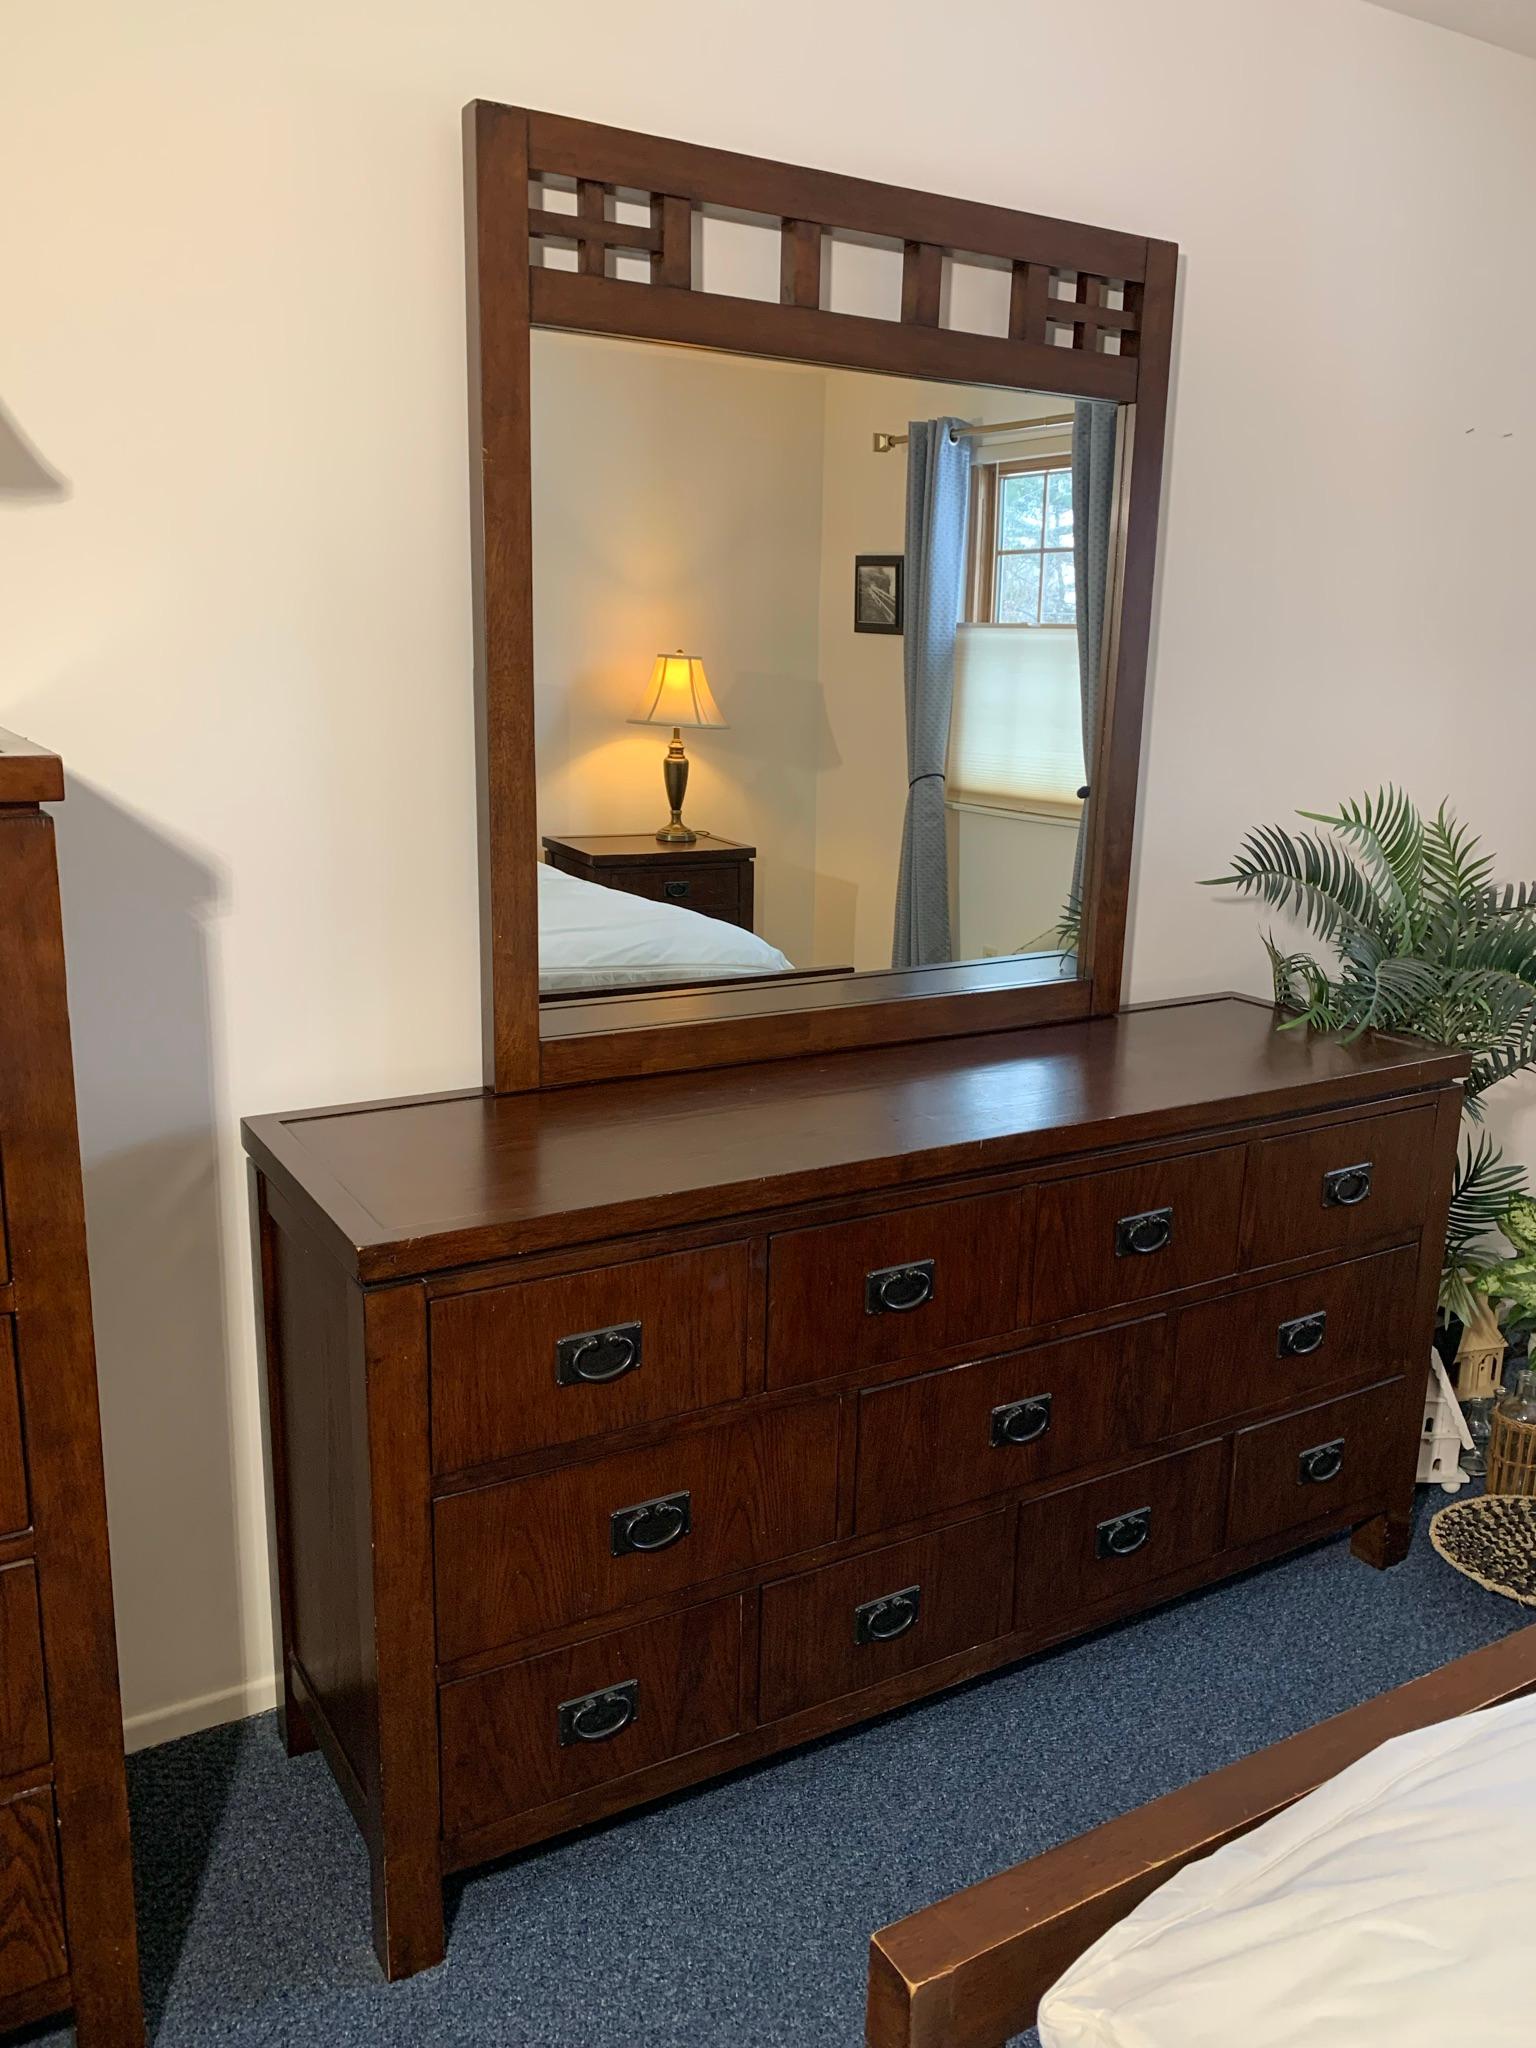 Queen Bedroom Set Including - Bed, Mattress, Box Spring, Chest of Drawers, Dresser & Night Stand